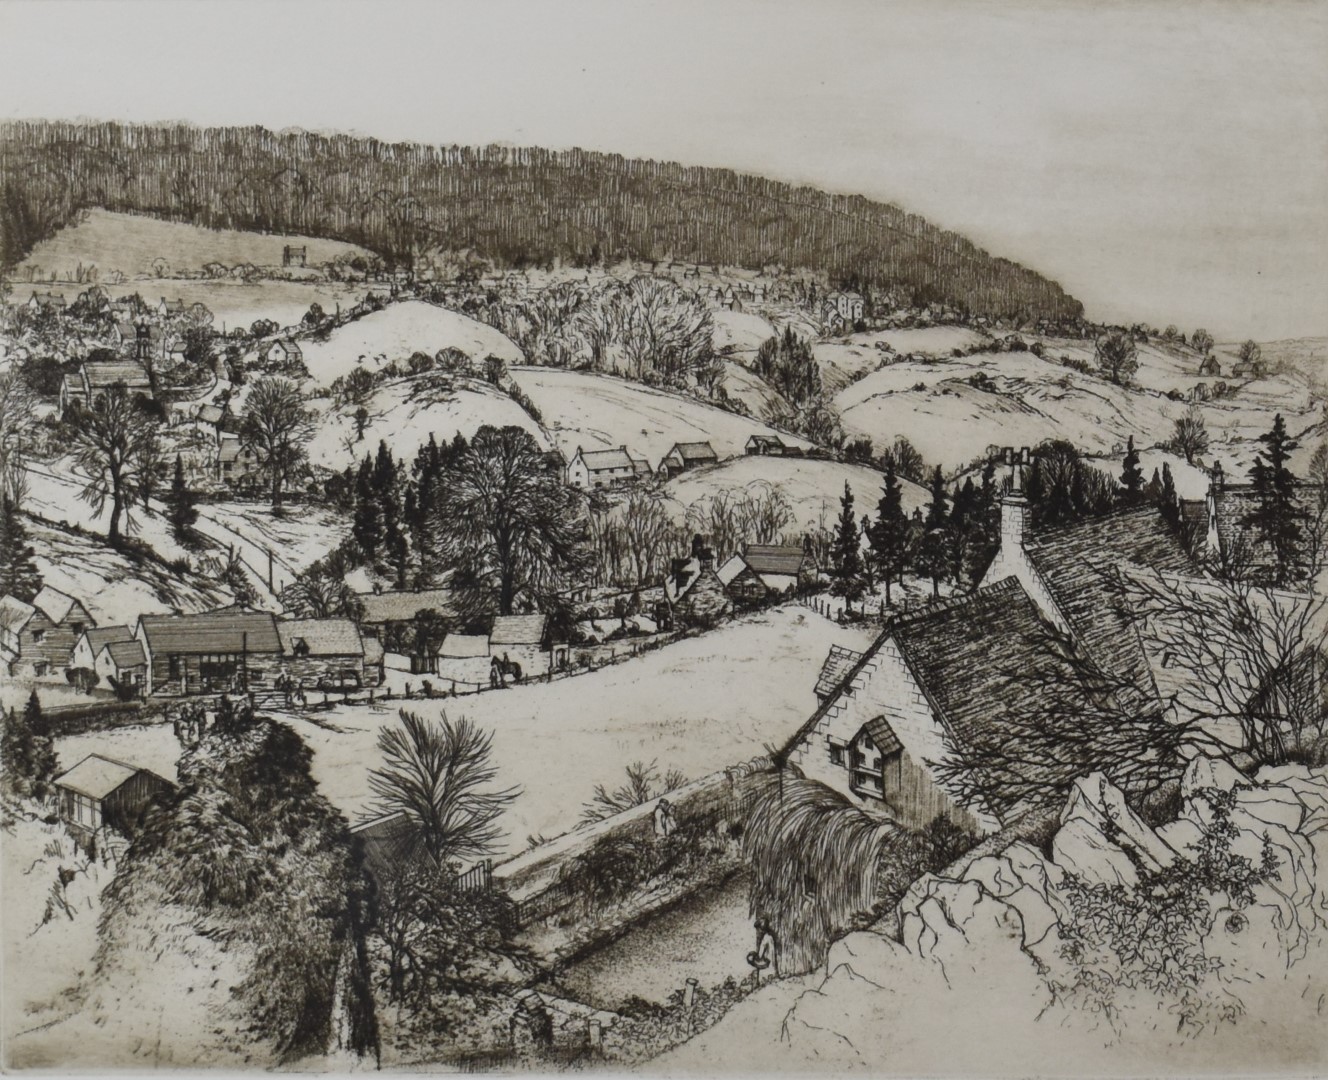 Harold Sayer pair of signed limited edition 89/100 and 6/200 etchings 'Lane Through The Village' and - Image 7 of 10